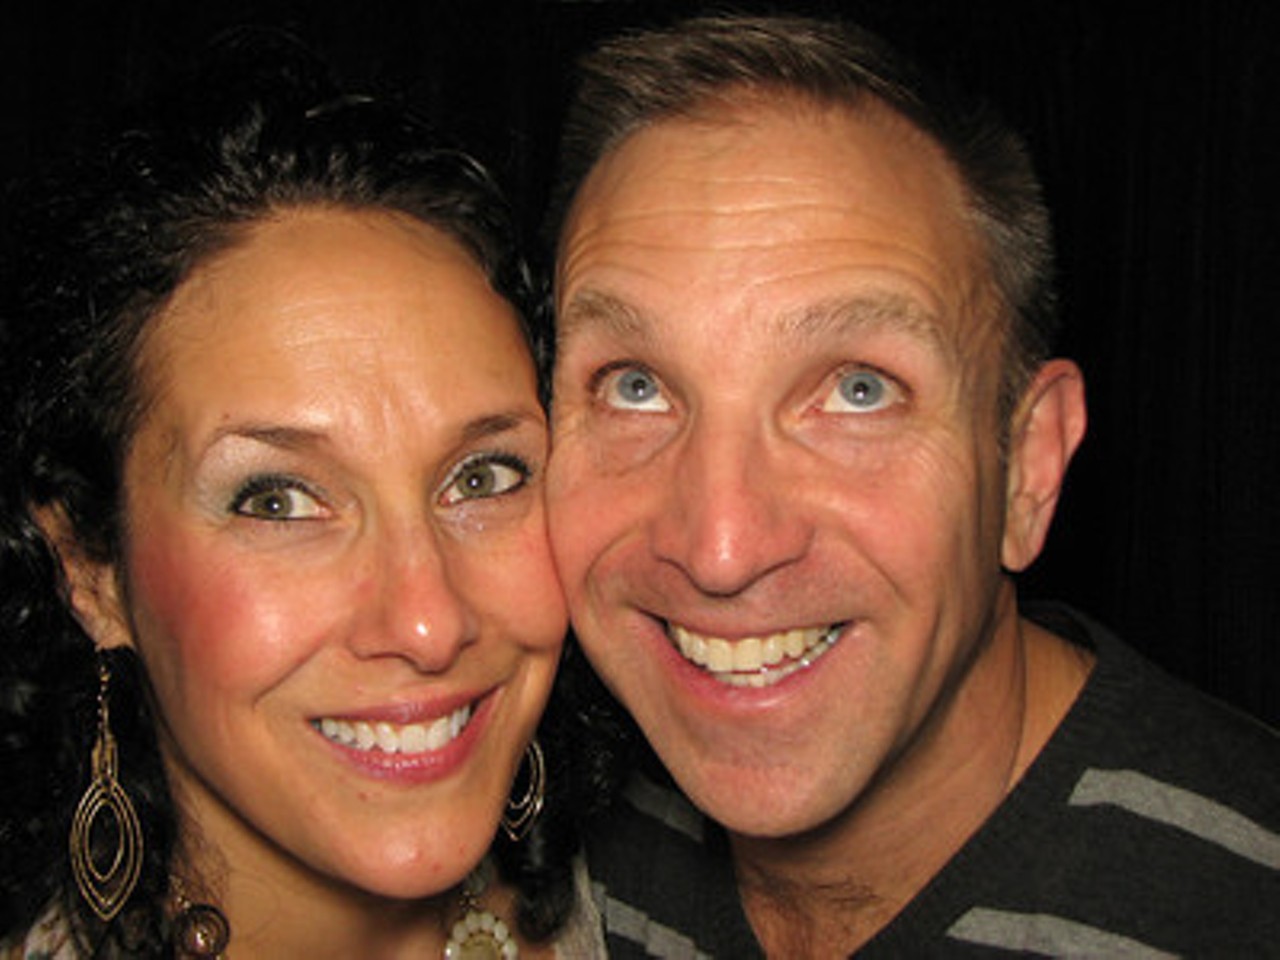 30 Photos from the Red Eye Photobooth at Scene's Best of Cleveland 2014 Party